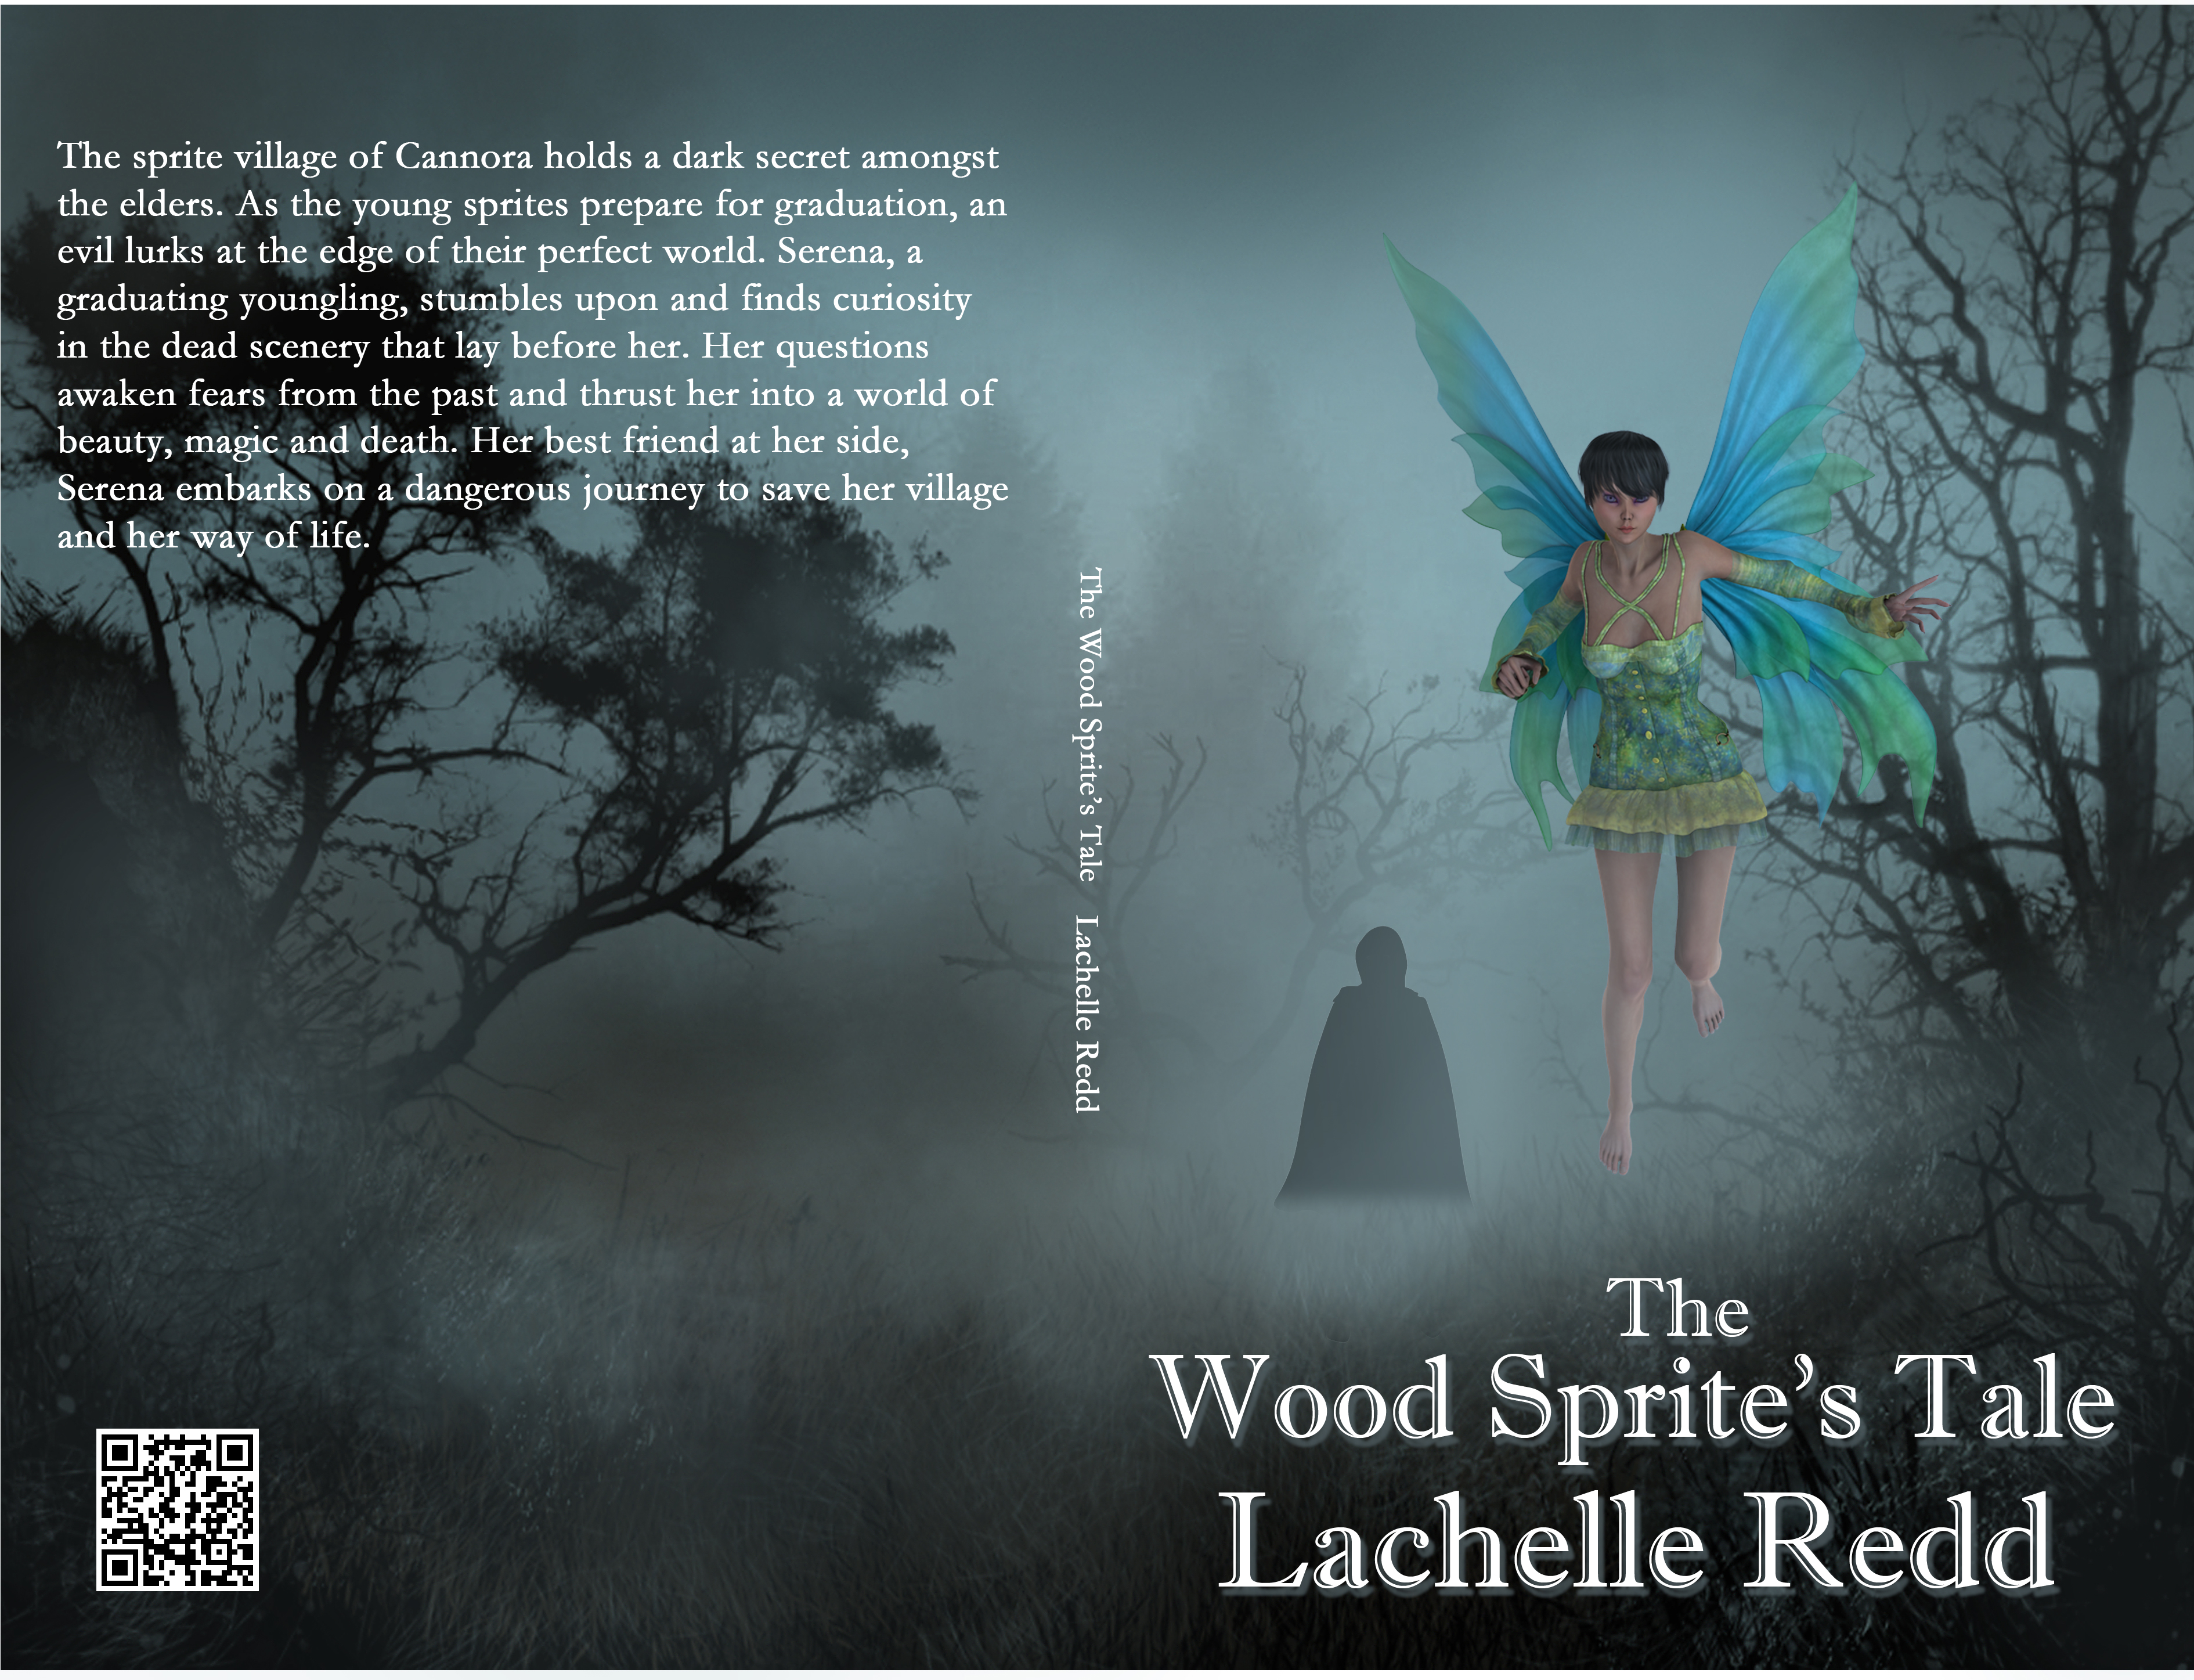 The Wood Sprite's Tale by Lachelle Redd